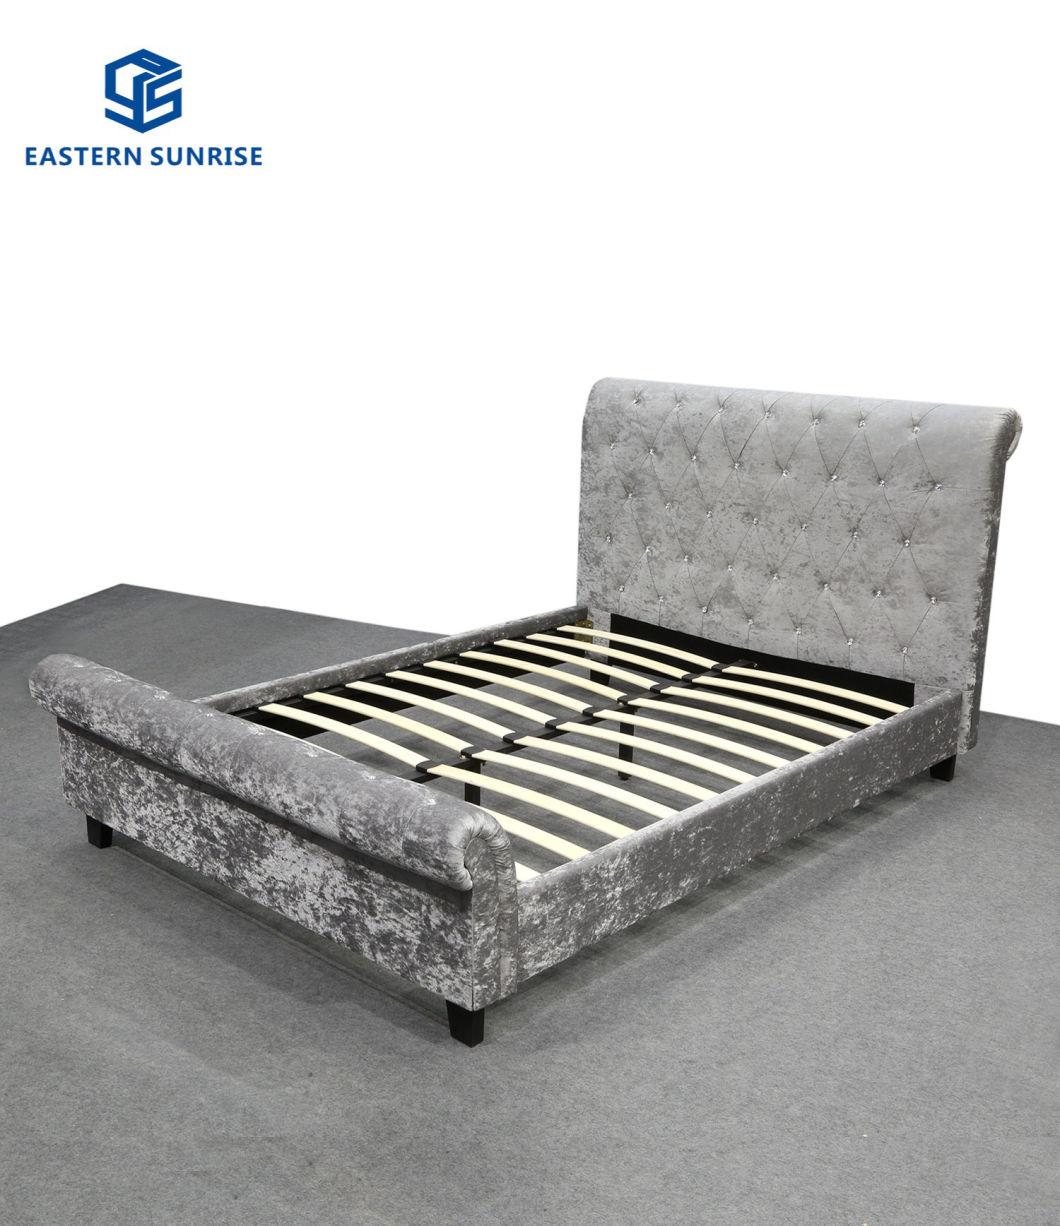 Sleigh Shape Luxury Design Leather Bed for Double Queen King Size